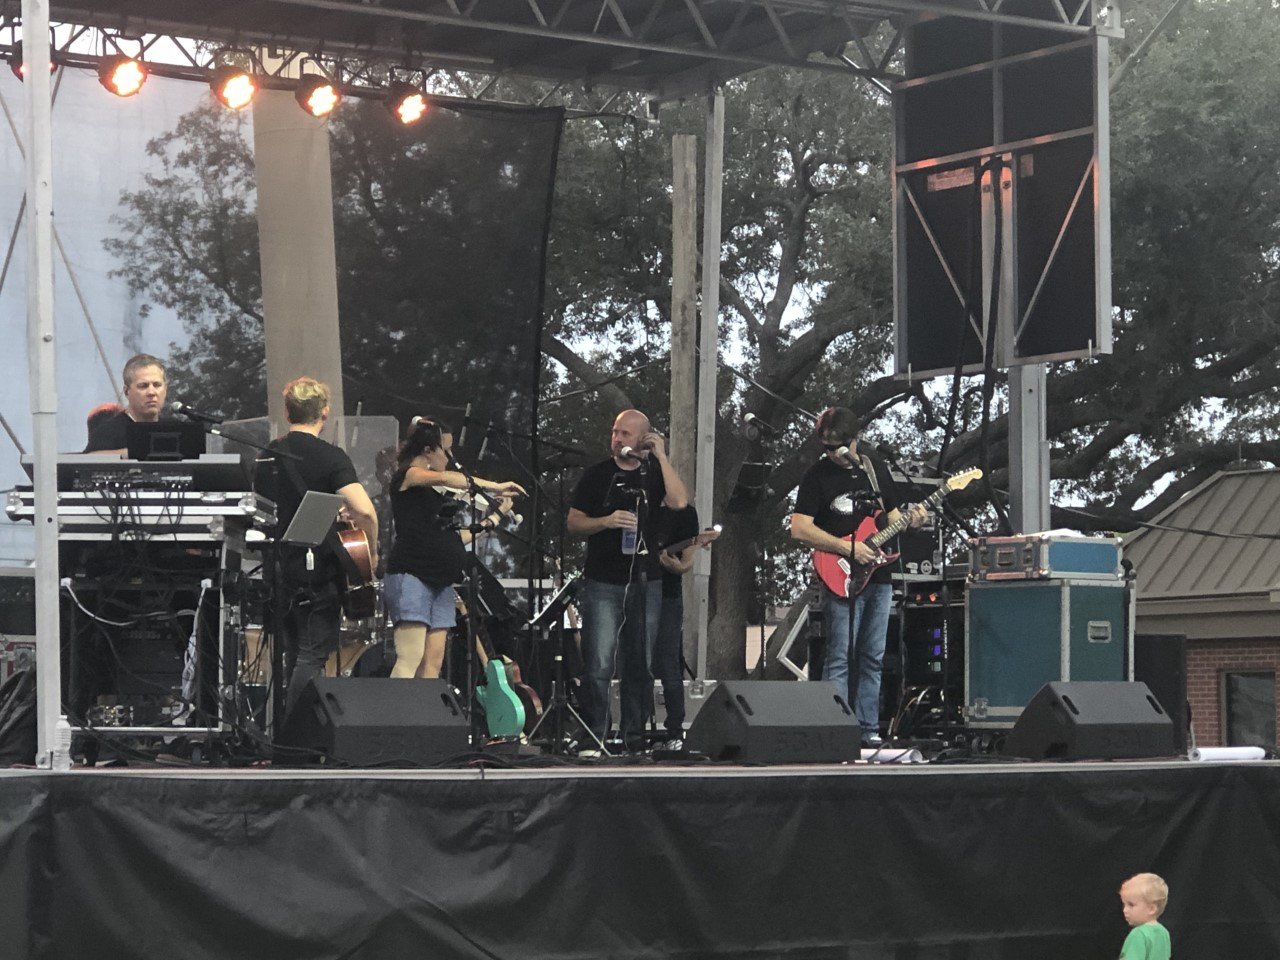 The band On the Side performs Friday at the Katy Rice Festival. Robert Zientek, a friend of the musicians, said the band gets its name because all its musicians perform their music “on the side" in addition to their full-time jobs.